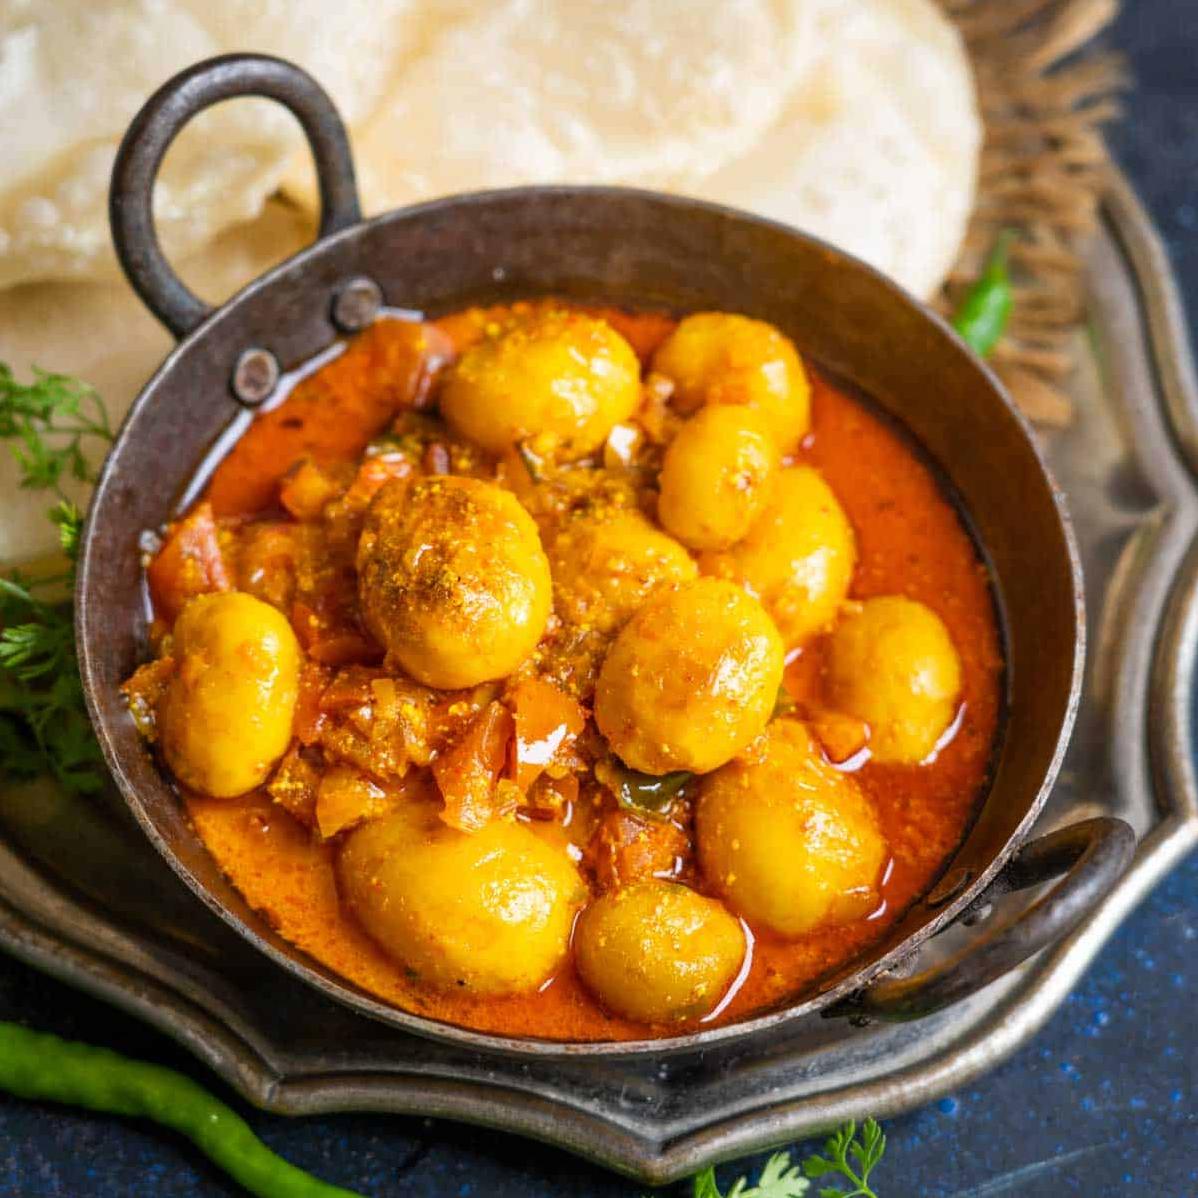  A delectable blend of aromatic spices and golden potatoes, this dish is sure to become your new favorite.